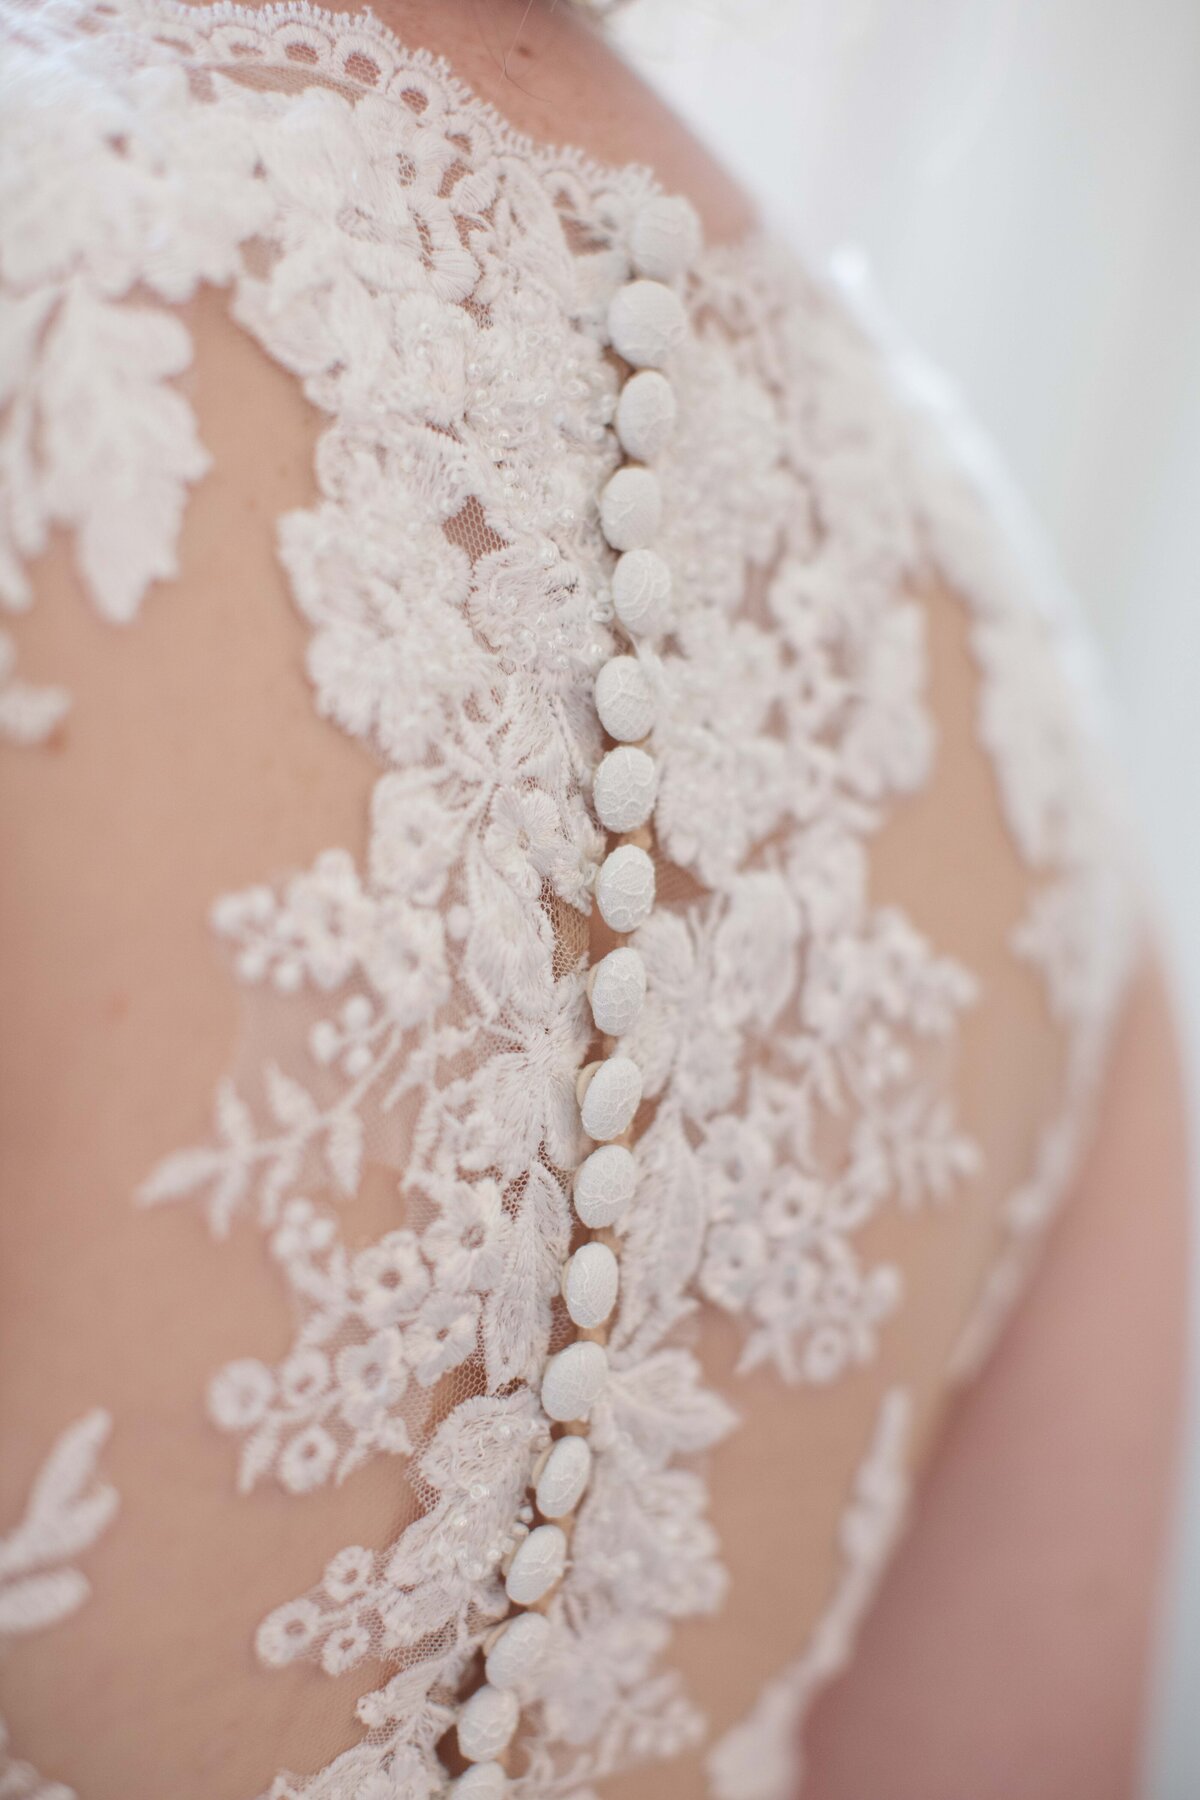 lace wedding dress detail with buttons by Firefly Photography